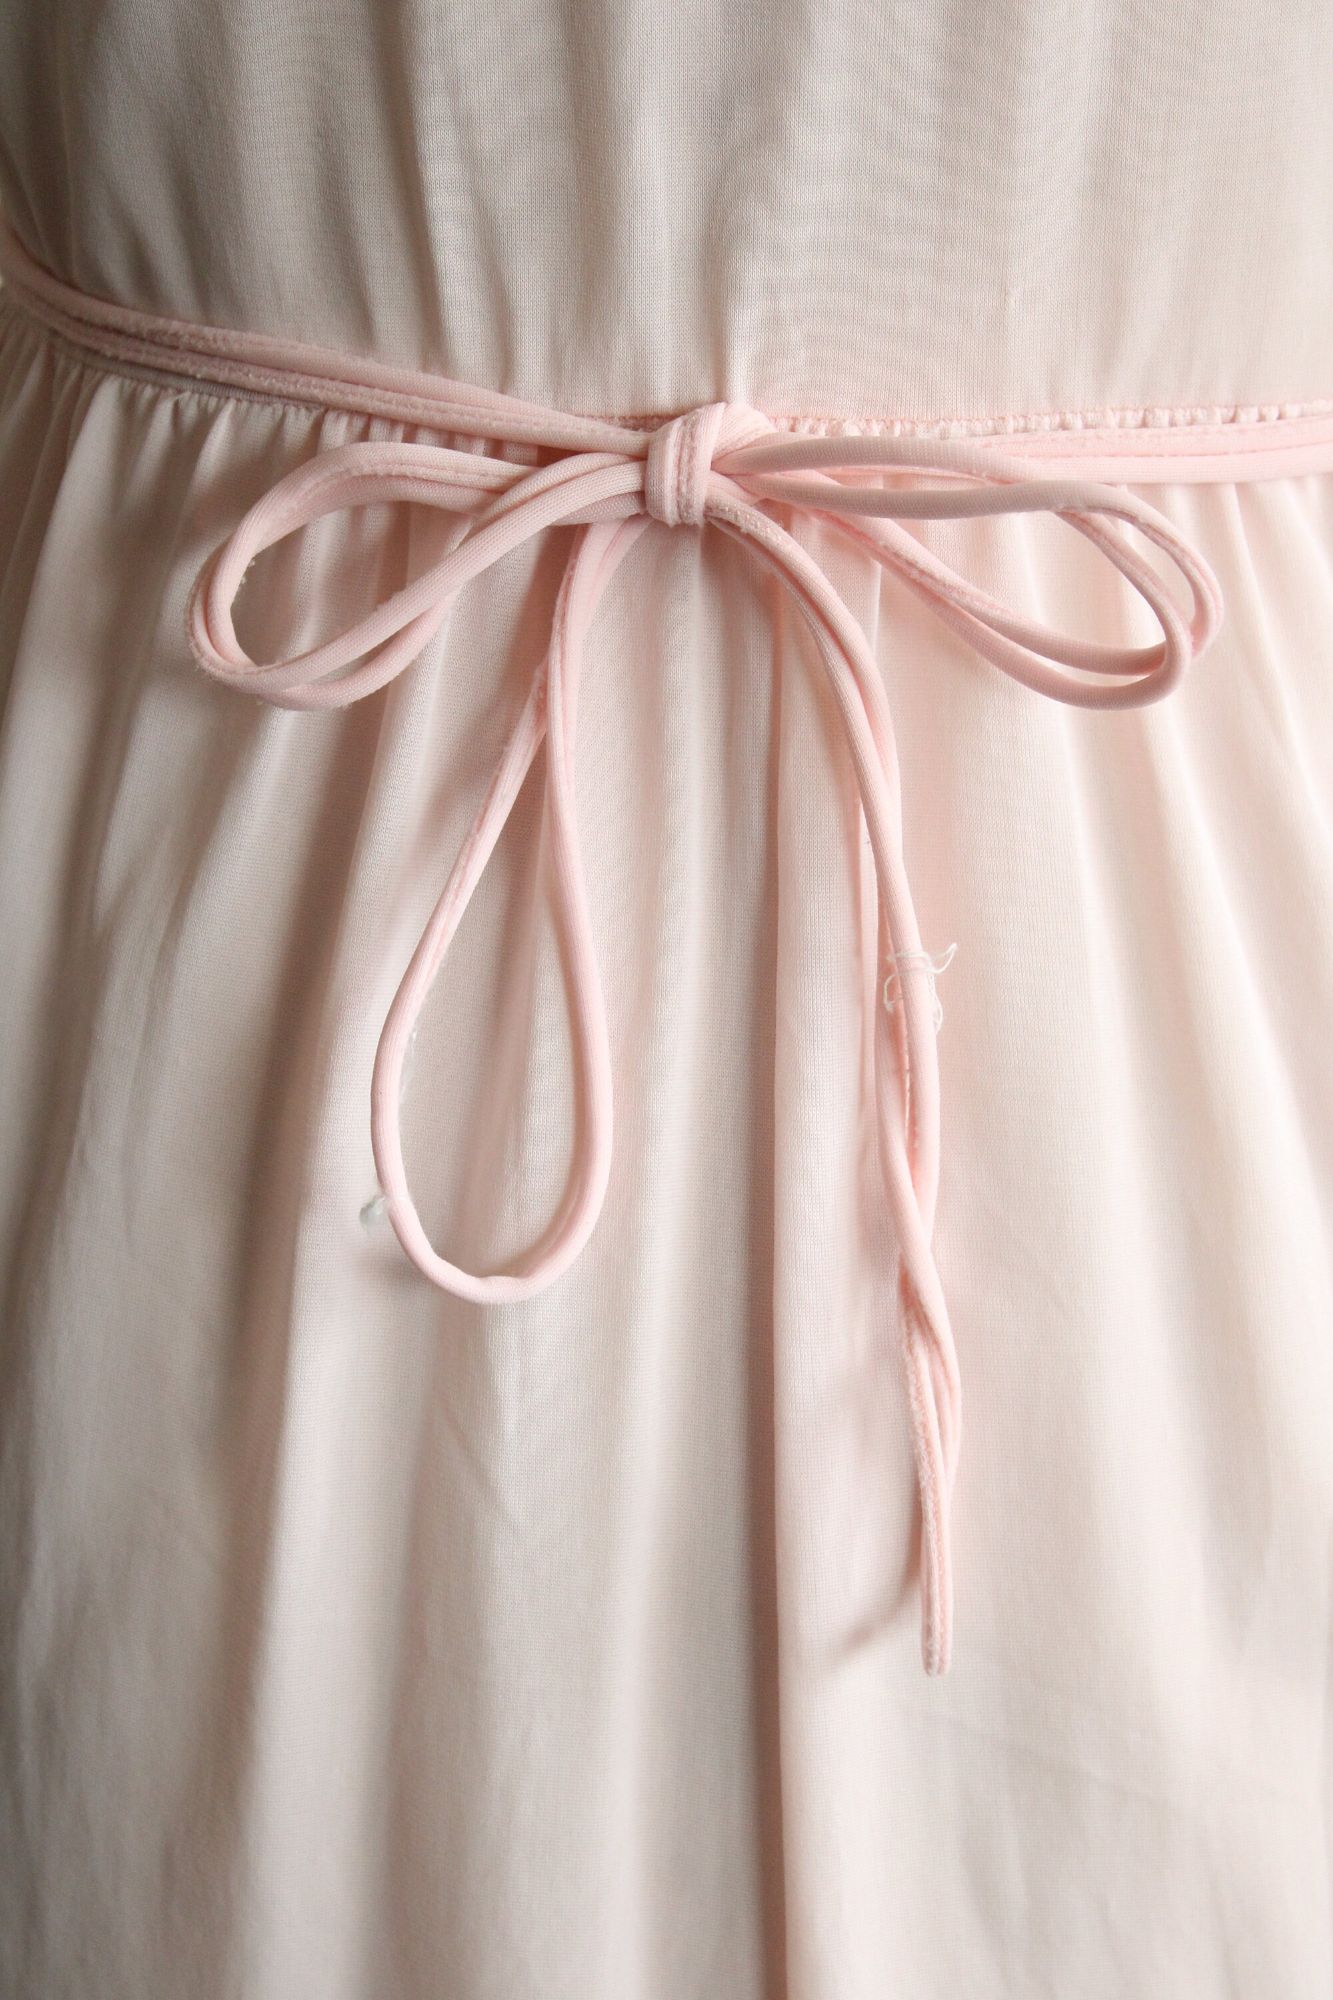 Vintage 1950s Pink Nylon with Tie and Embroidered Floral Lace Trim Nightgown